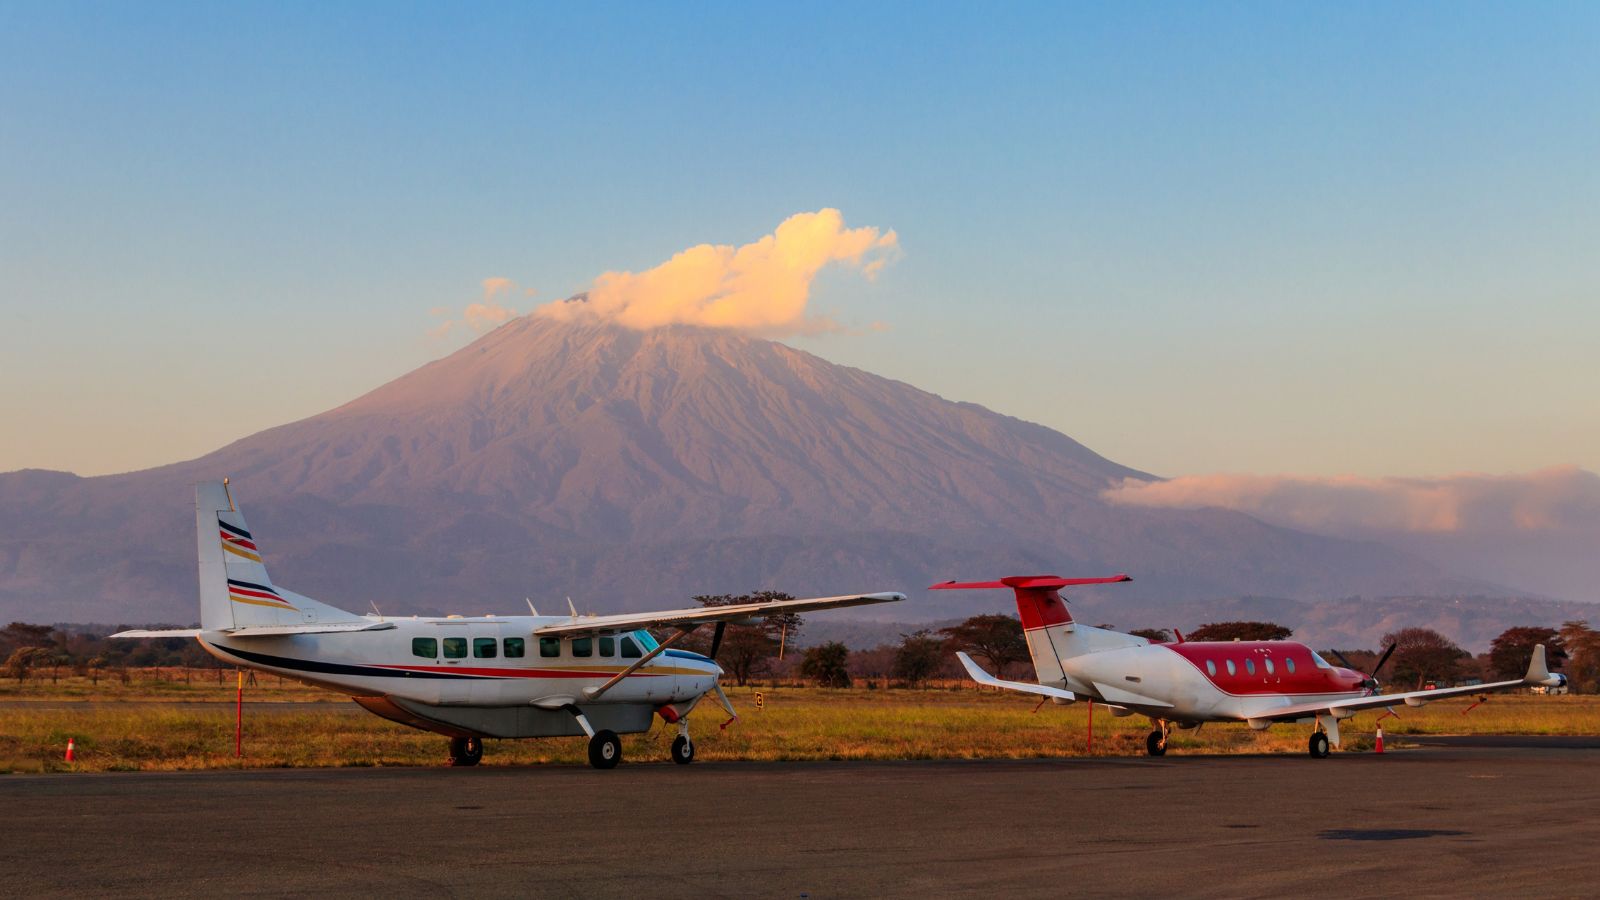 Airplanes in Tanzania